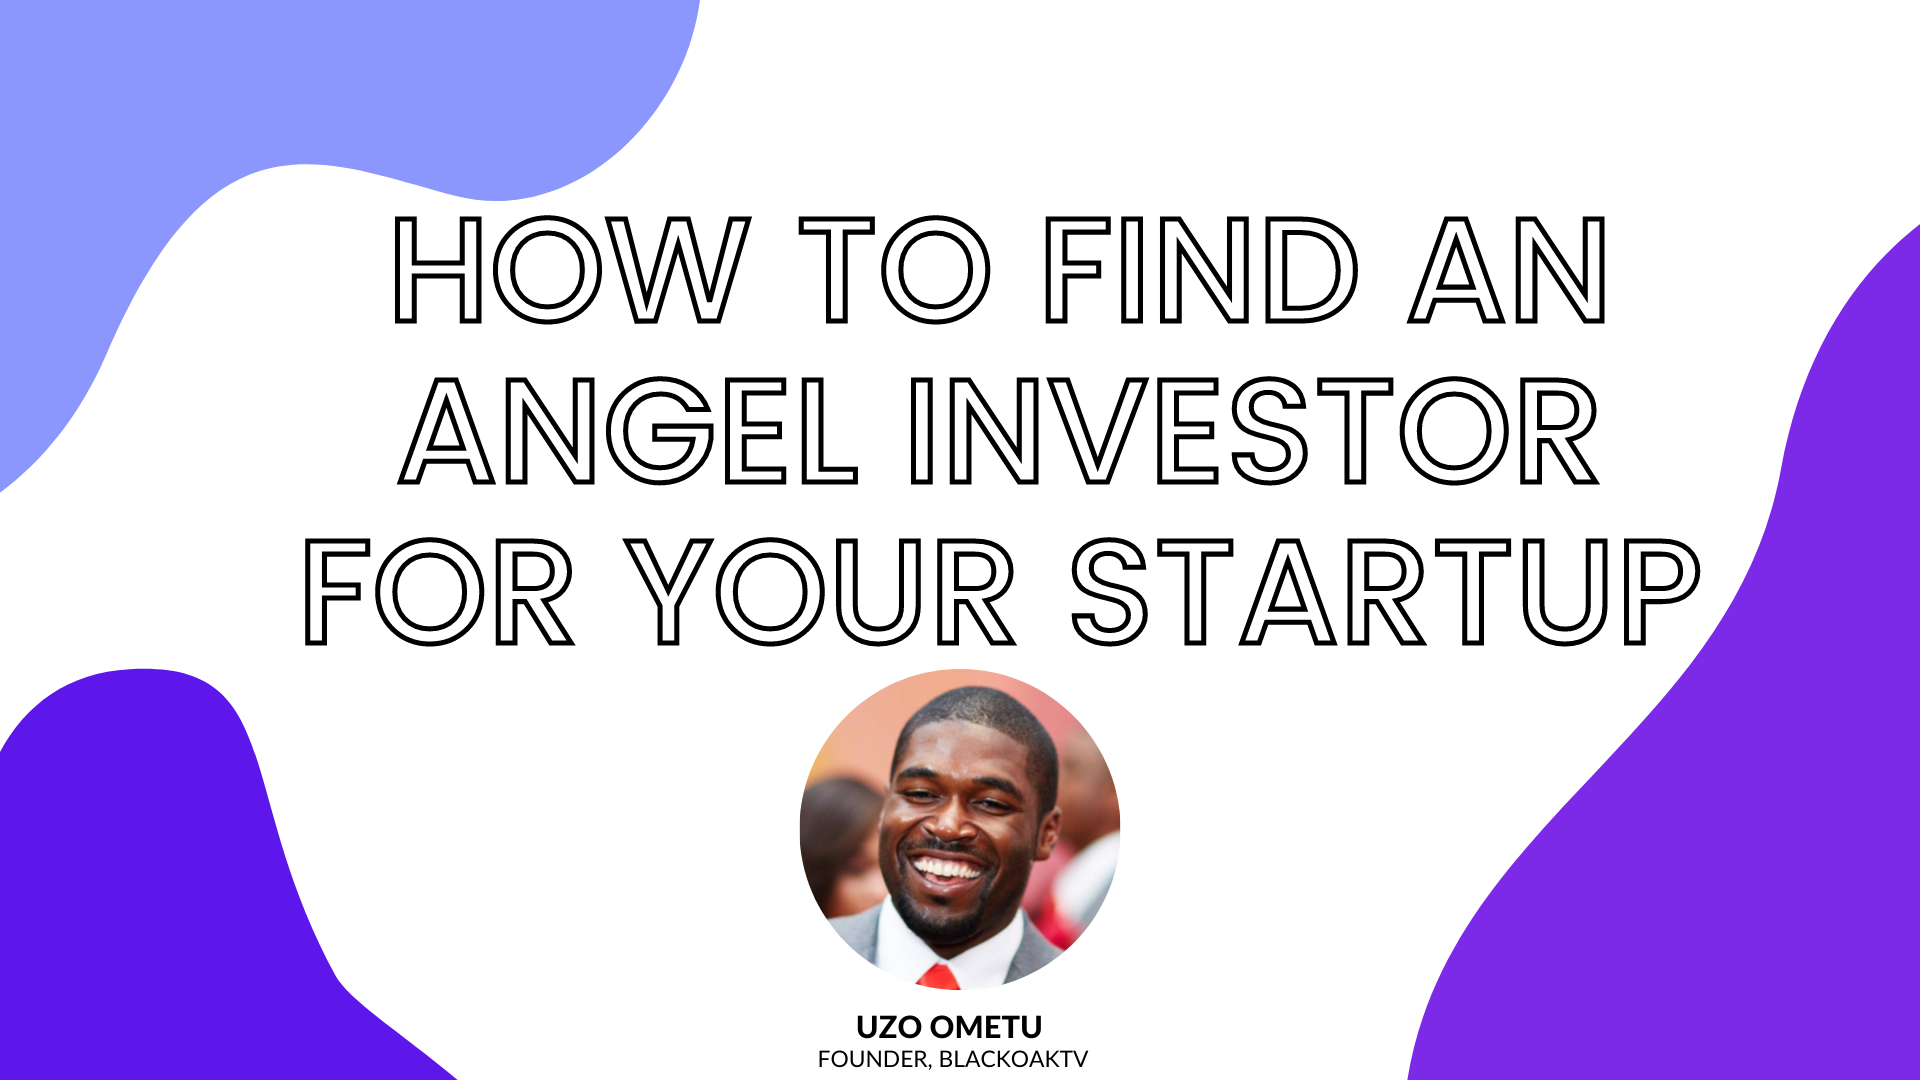 How to find angel investors for your startup